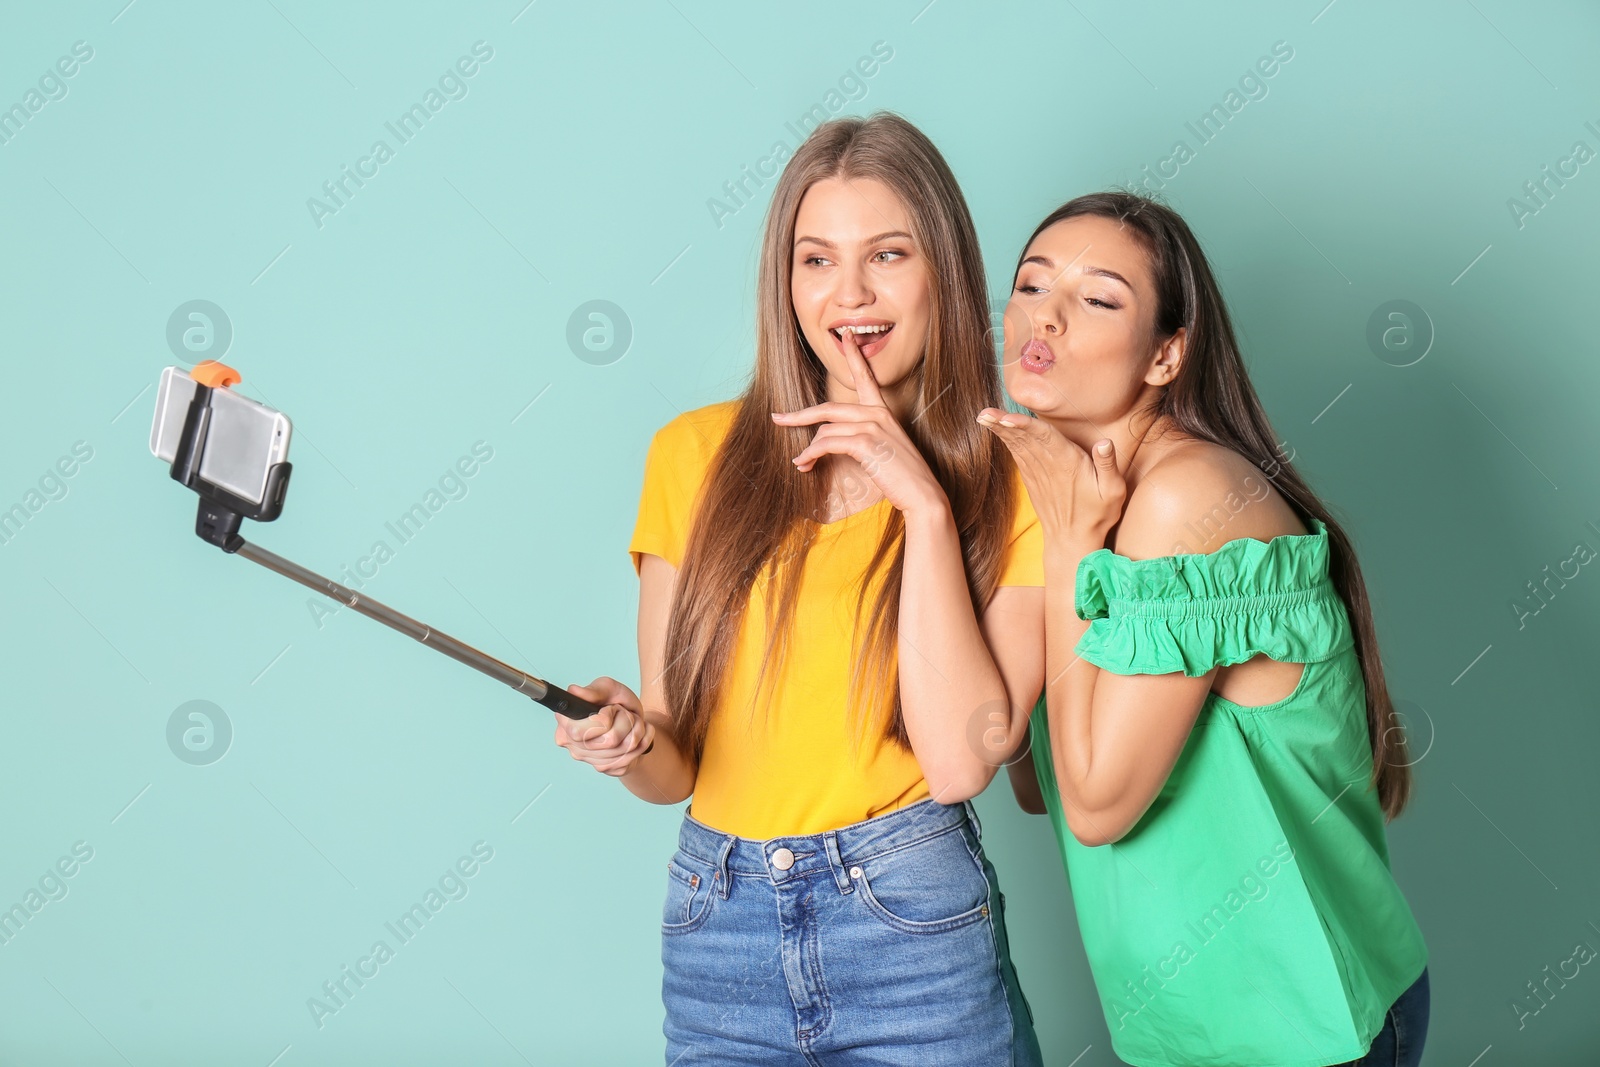 Photo of Young beautiful women taking selfie against color background